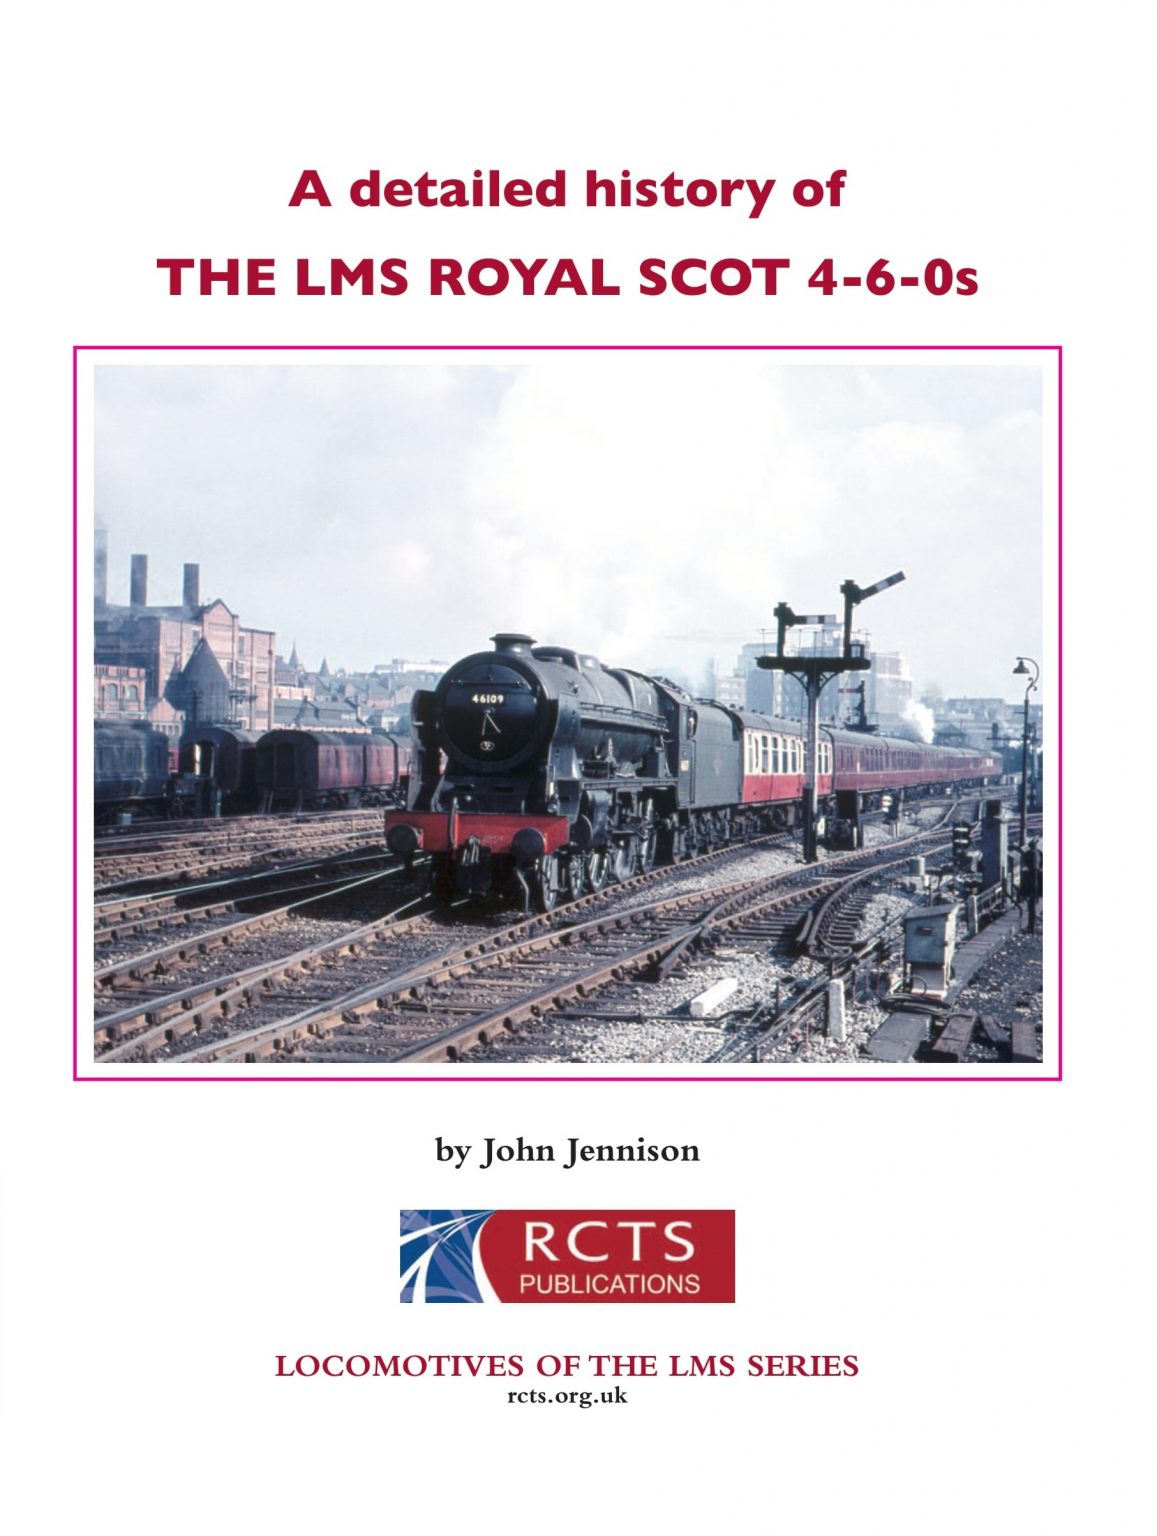 A Detailed History - The LMS Royal Scot 4-6-0-s 